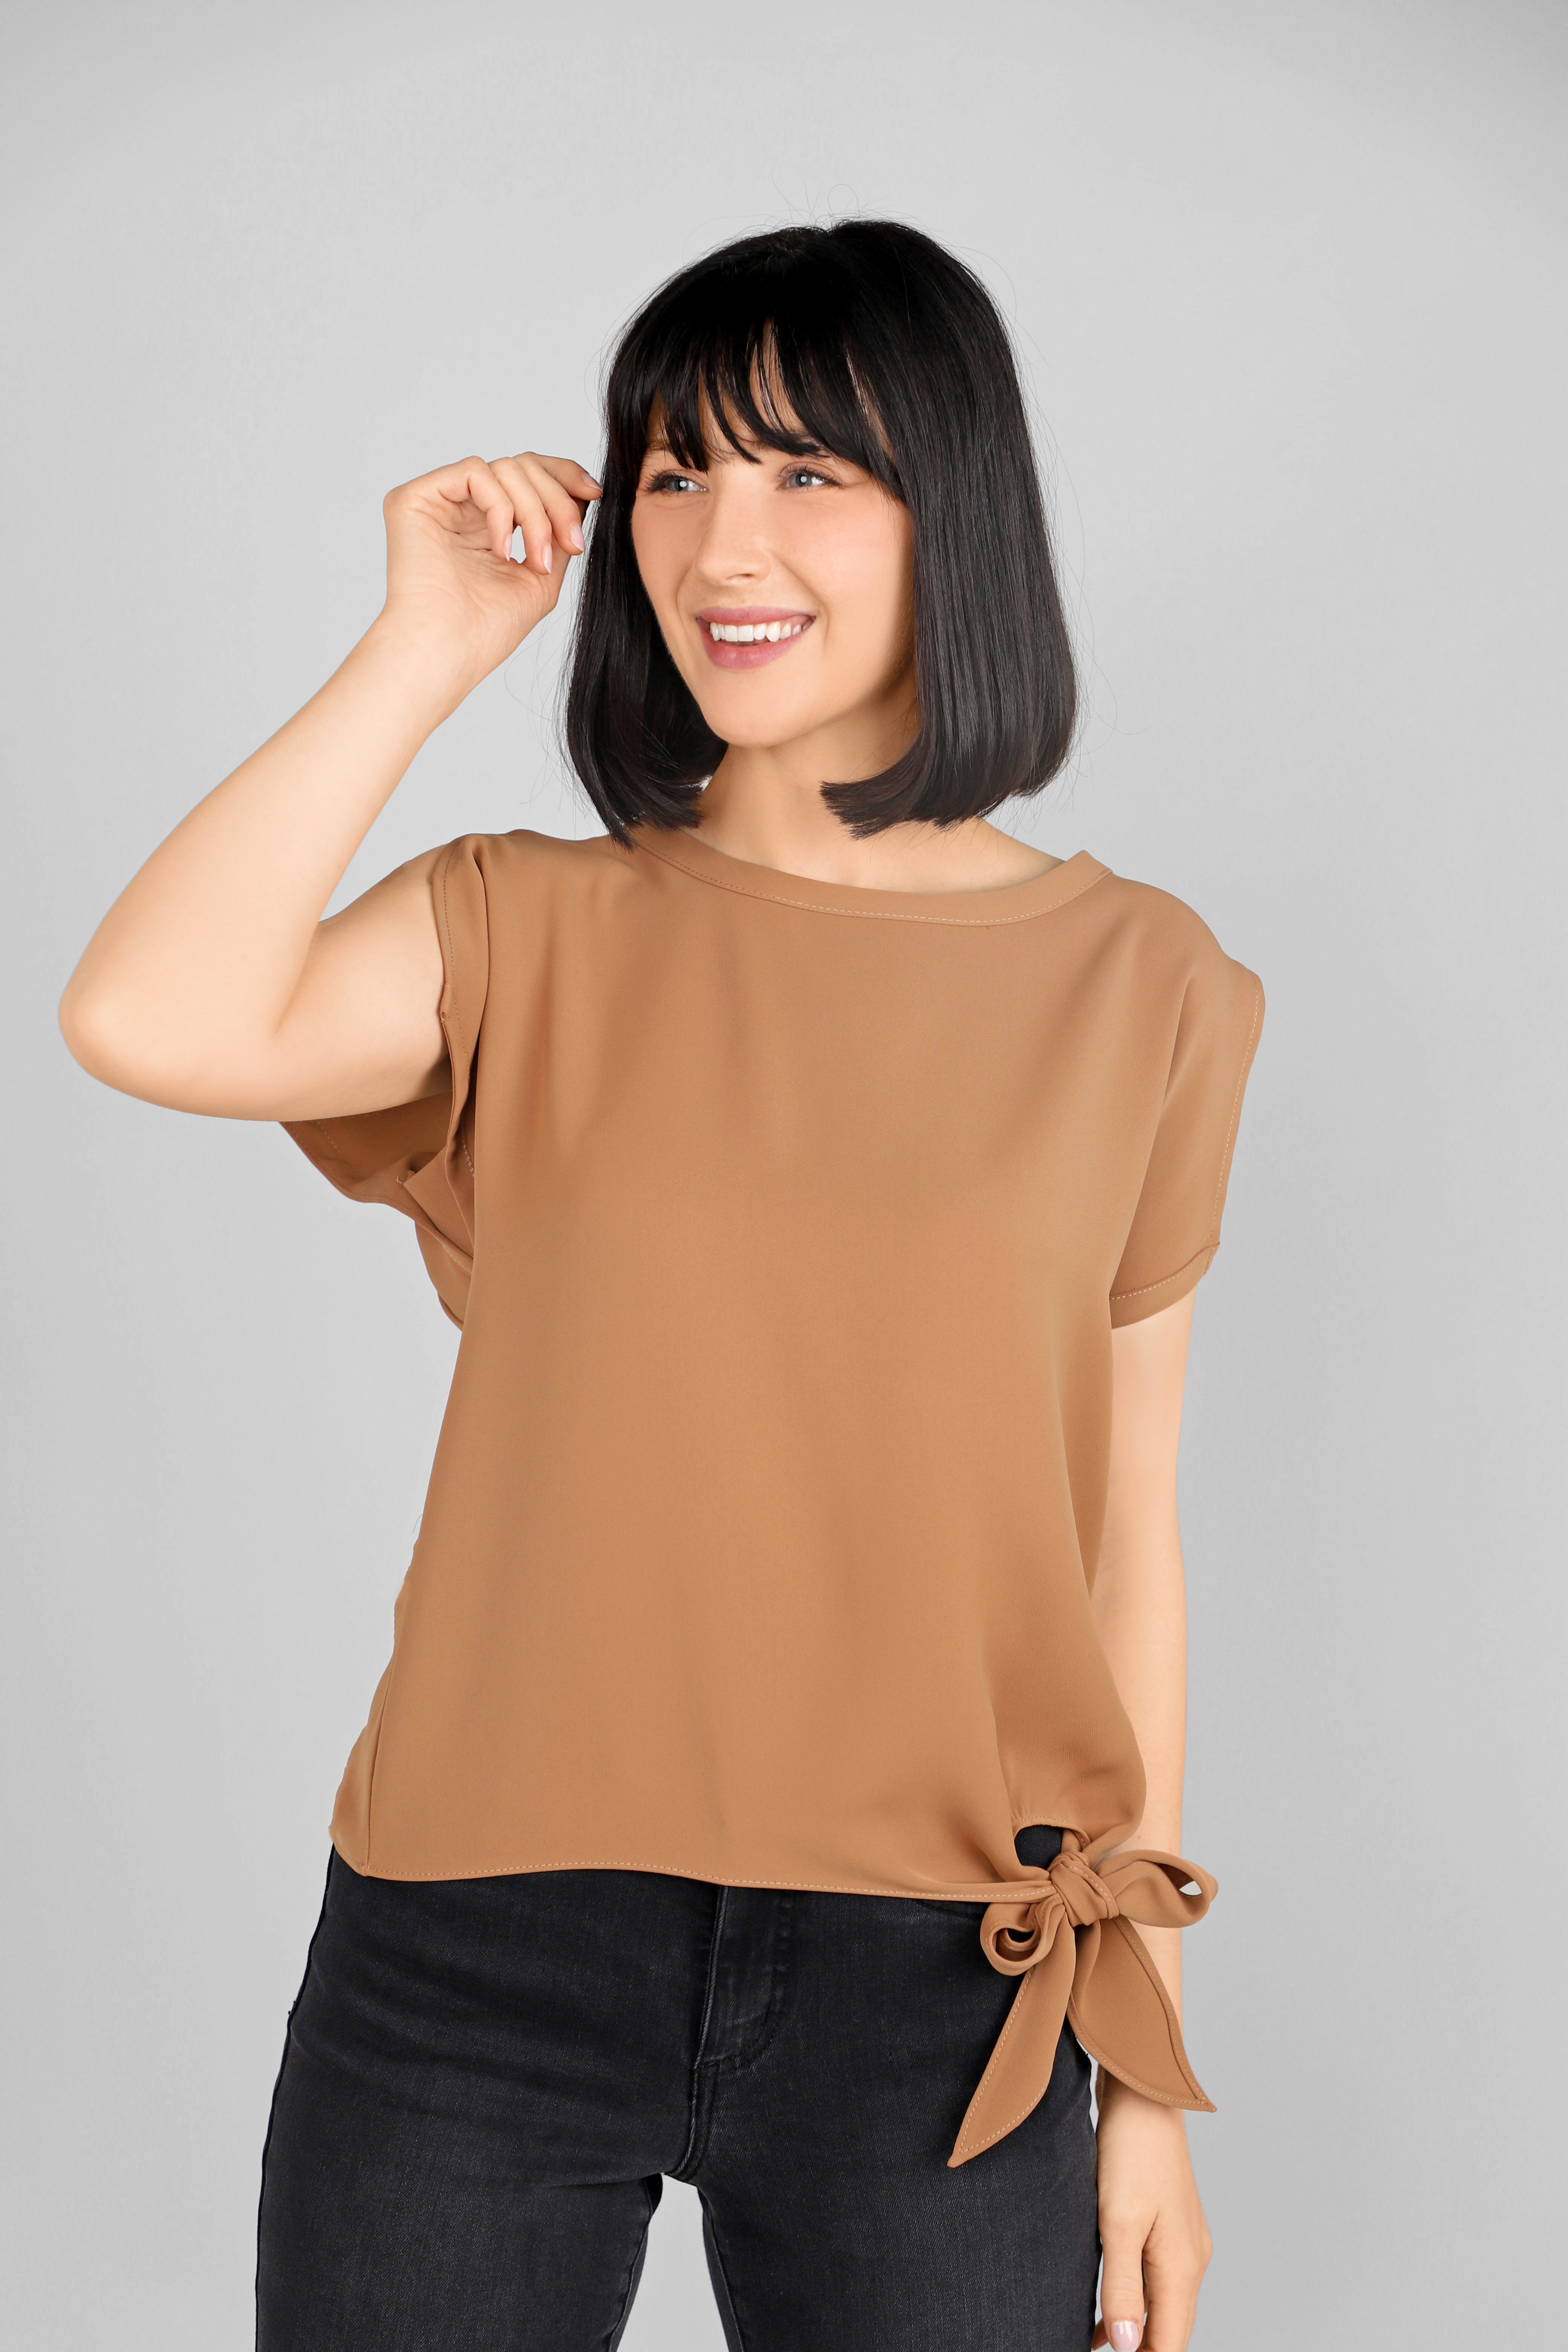 Women's Clothing FRANK LYMAN (181224) Short Sleeve Top with Side Tie in CHESTNUT